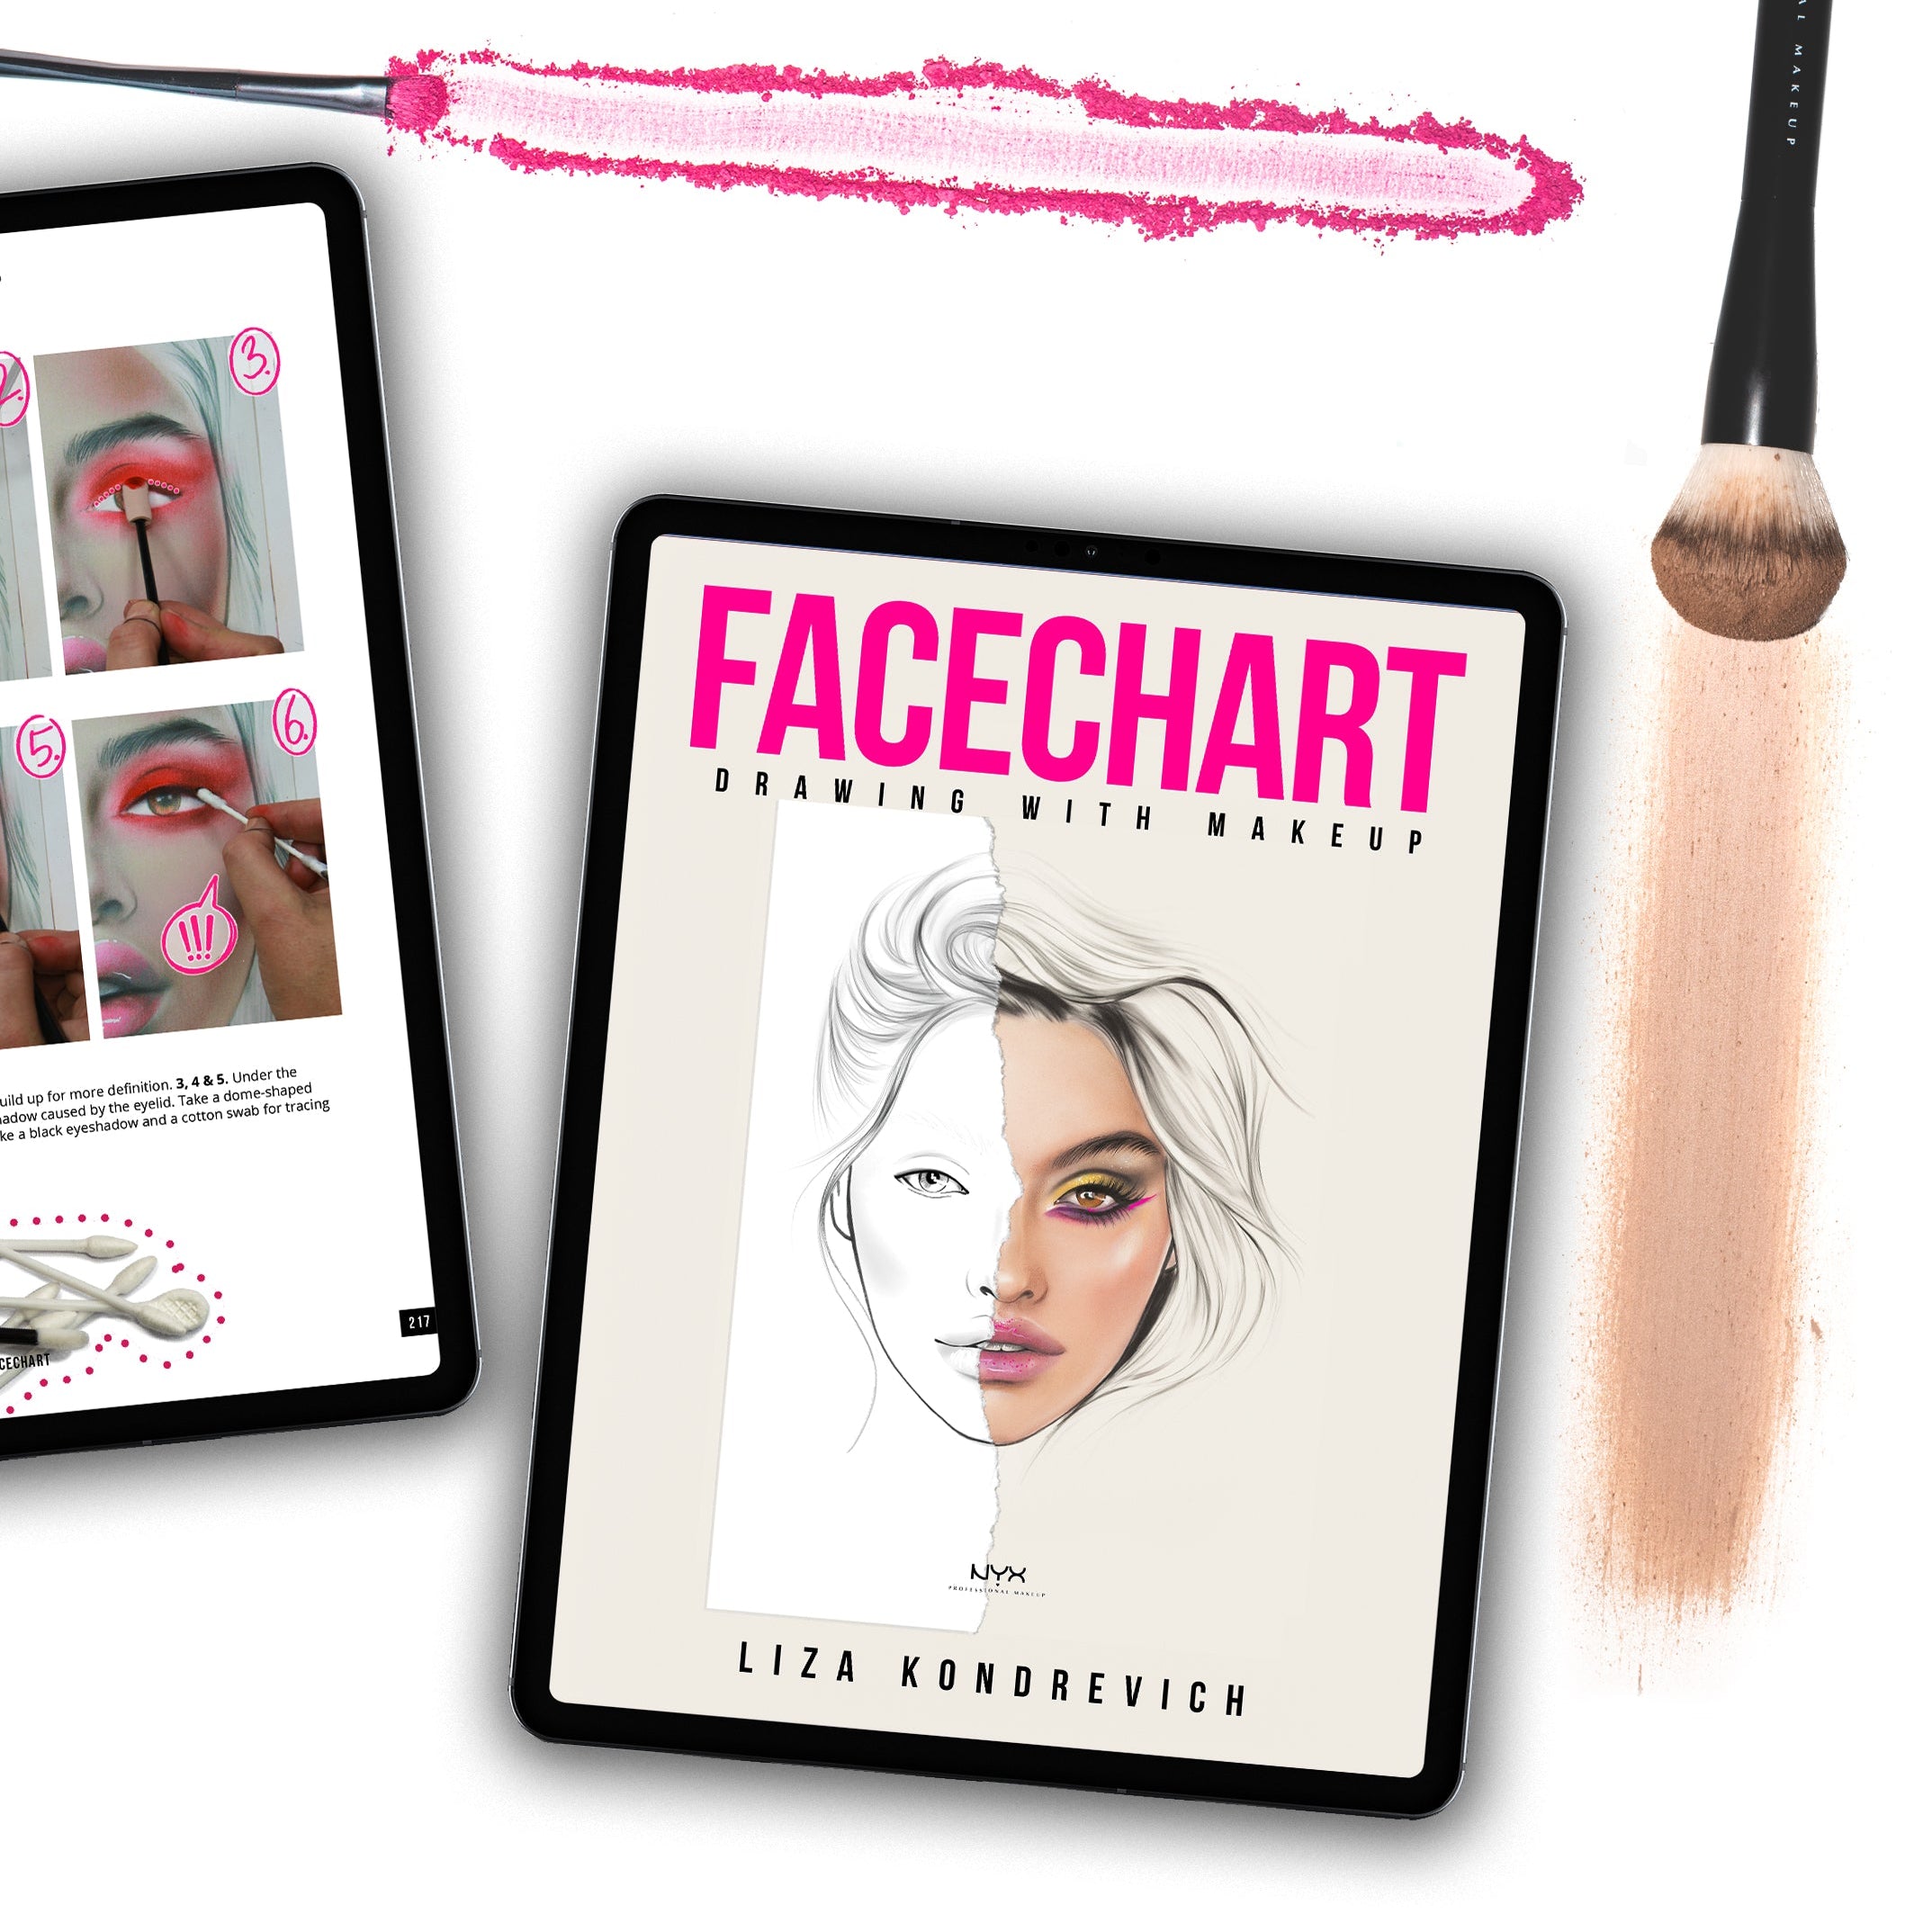 Digital version of the face chart book by liza kondrevich on a digital device and some makeup brushes in powder